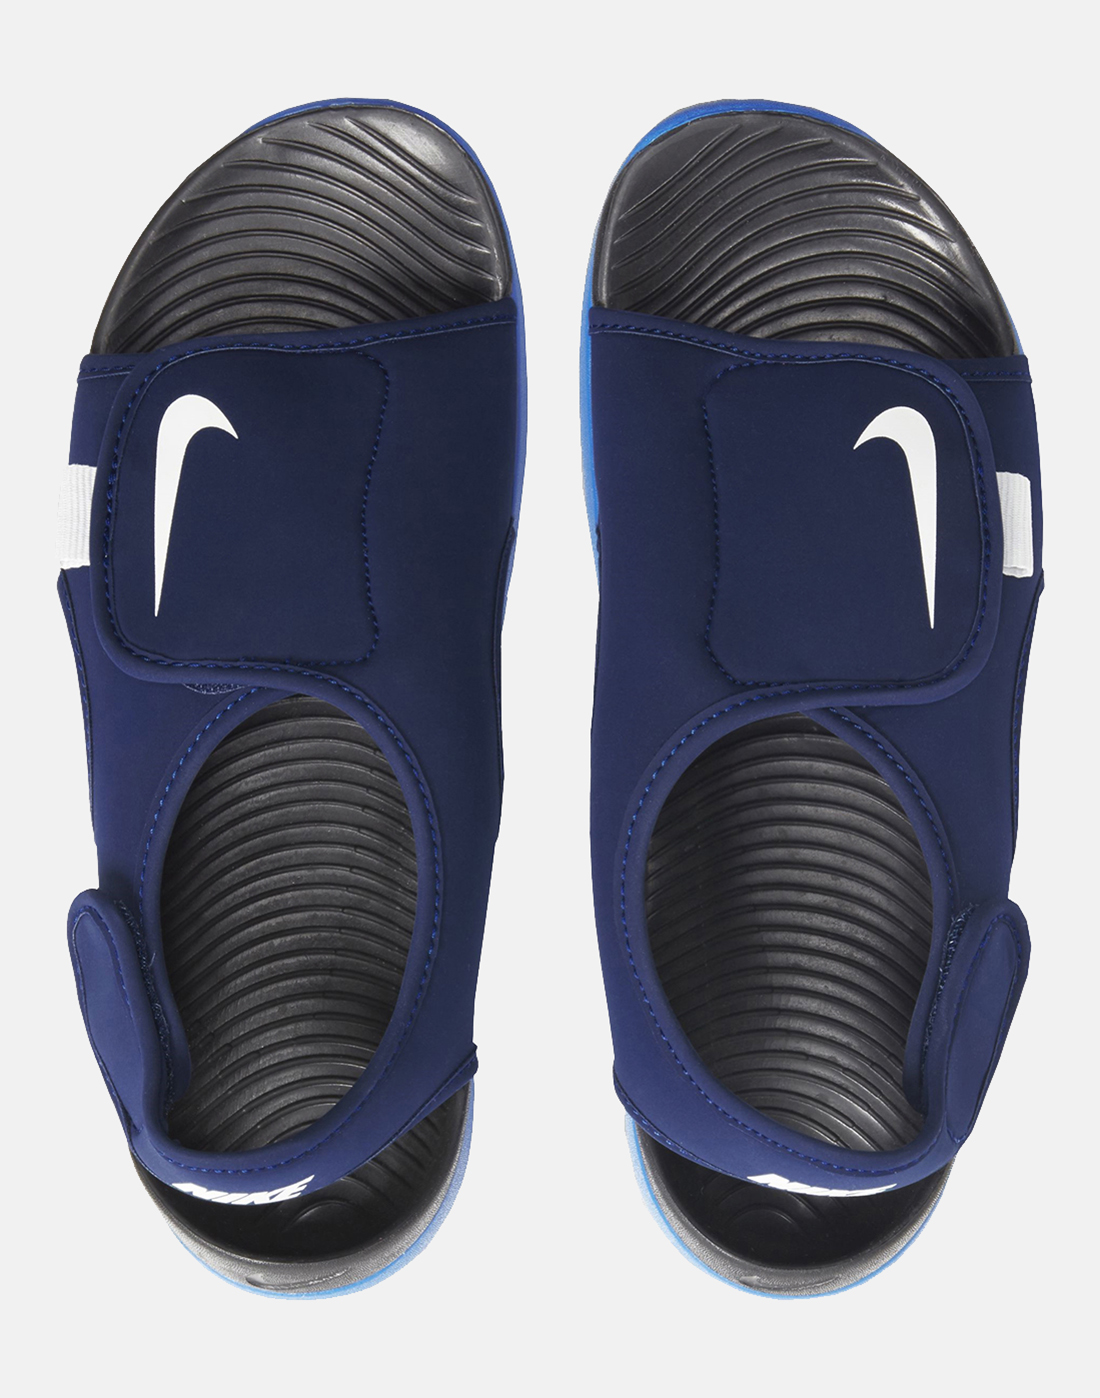 Nike Younger Kids Sunray Sandals - Blue | Life Style Sports IE